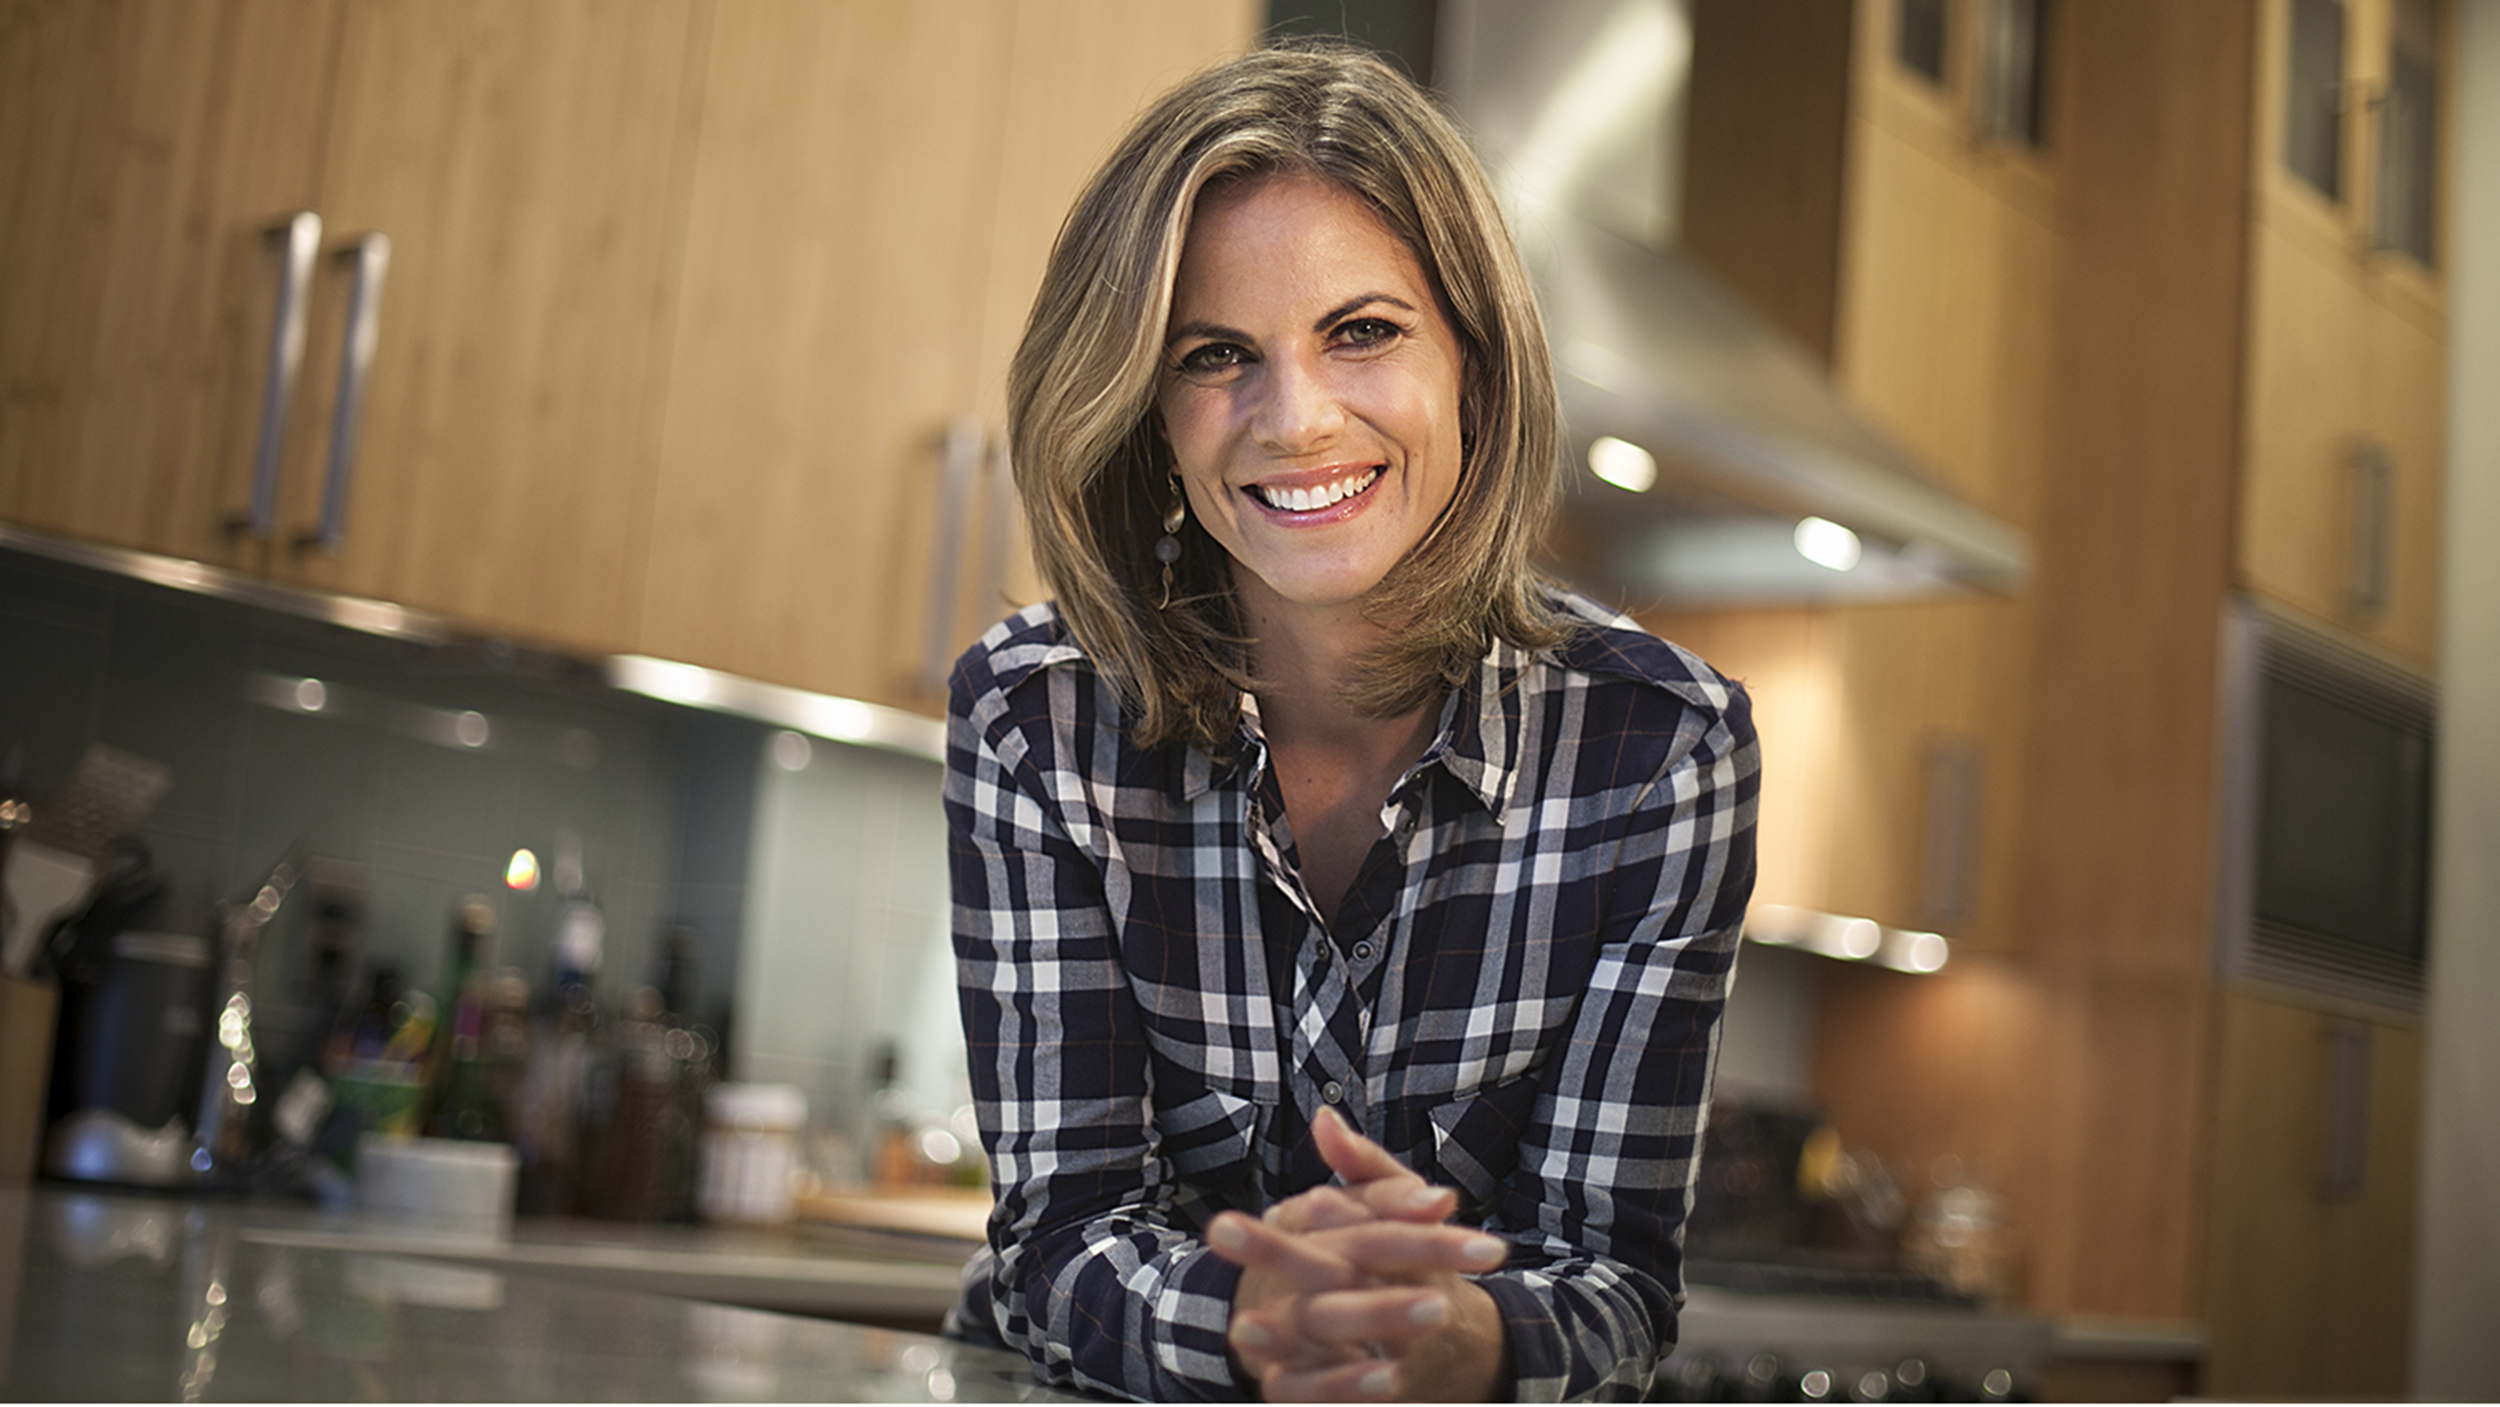 Natalie Morales welcomes you inside her New Jersey kitchen